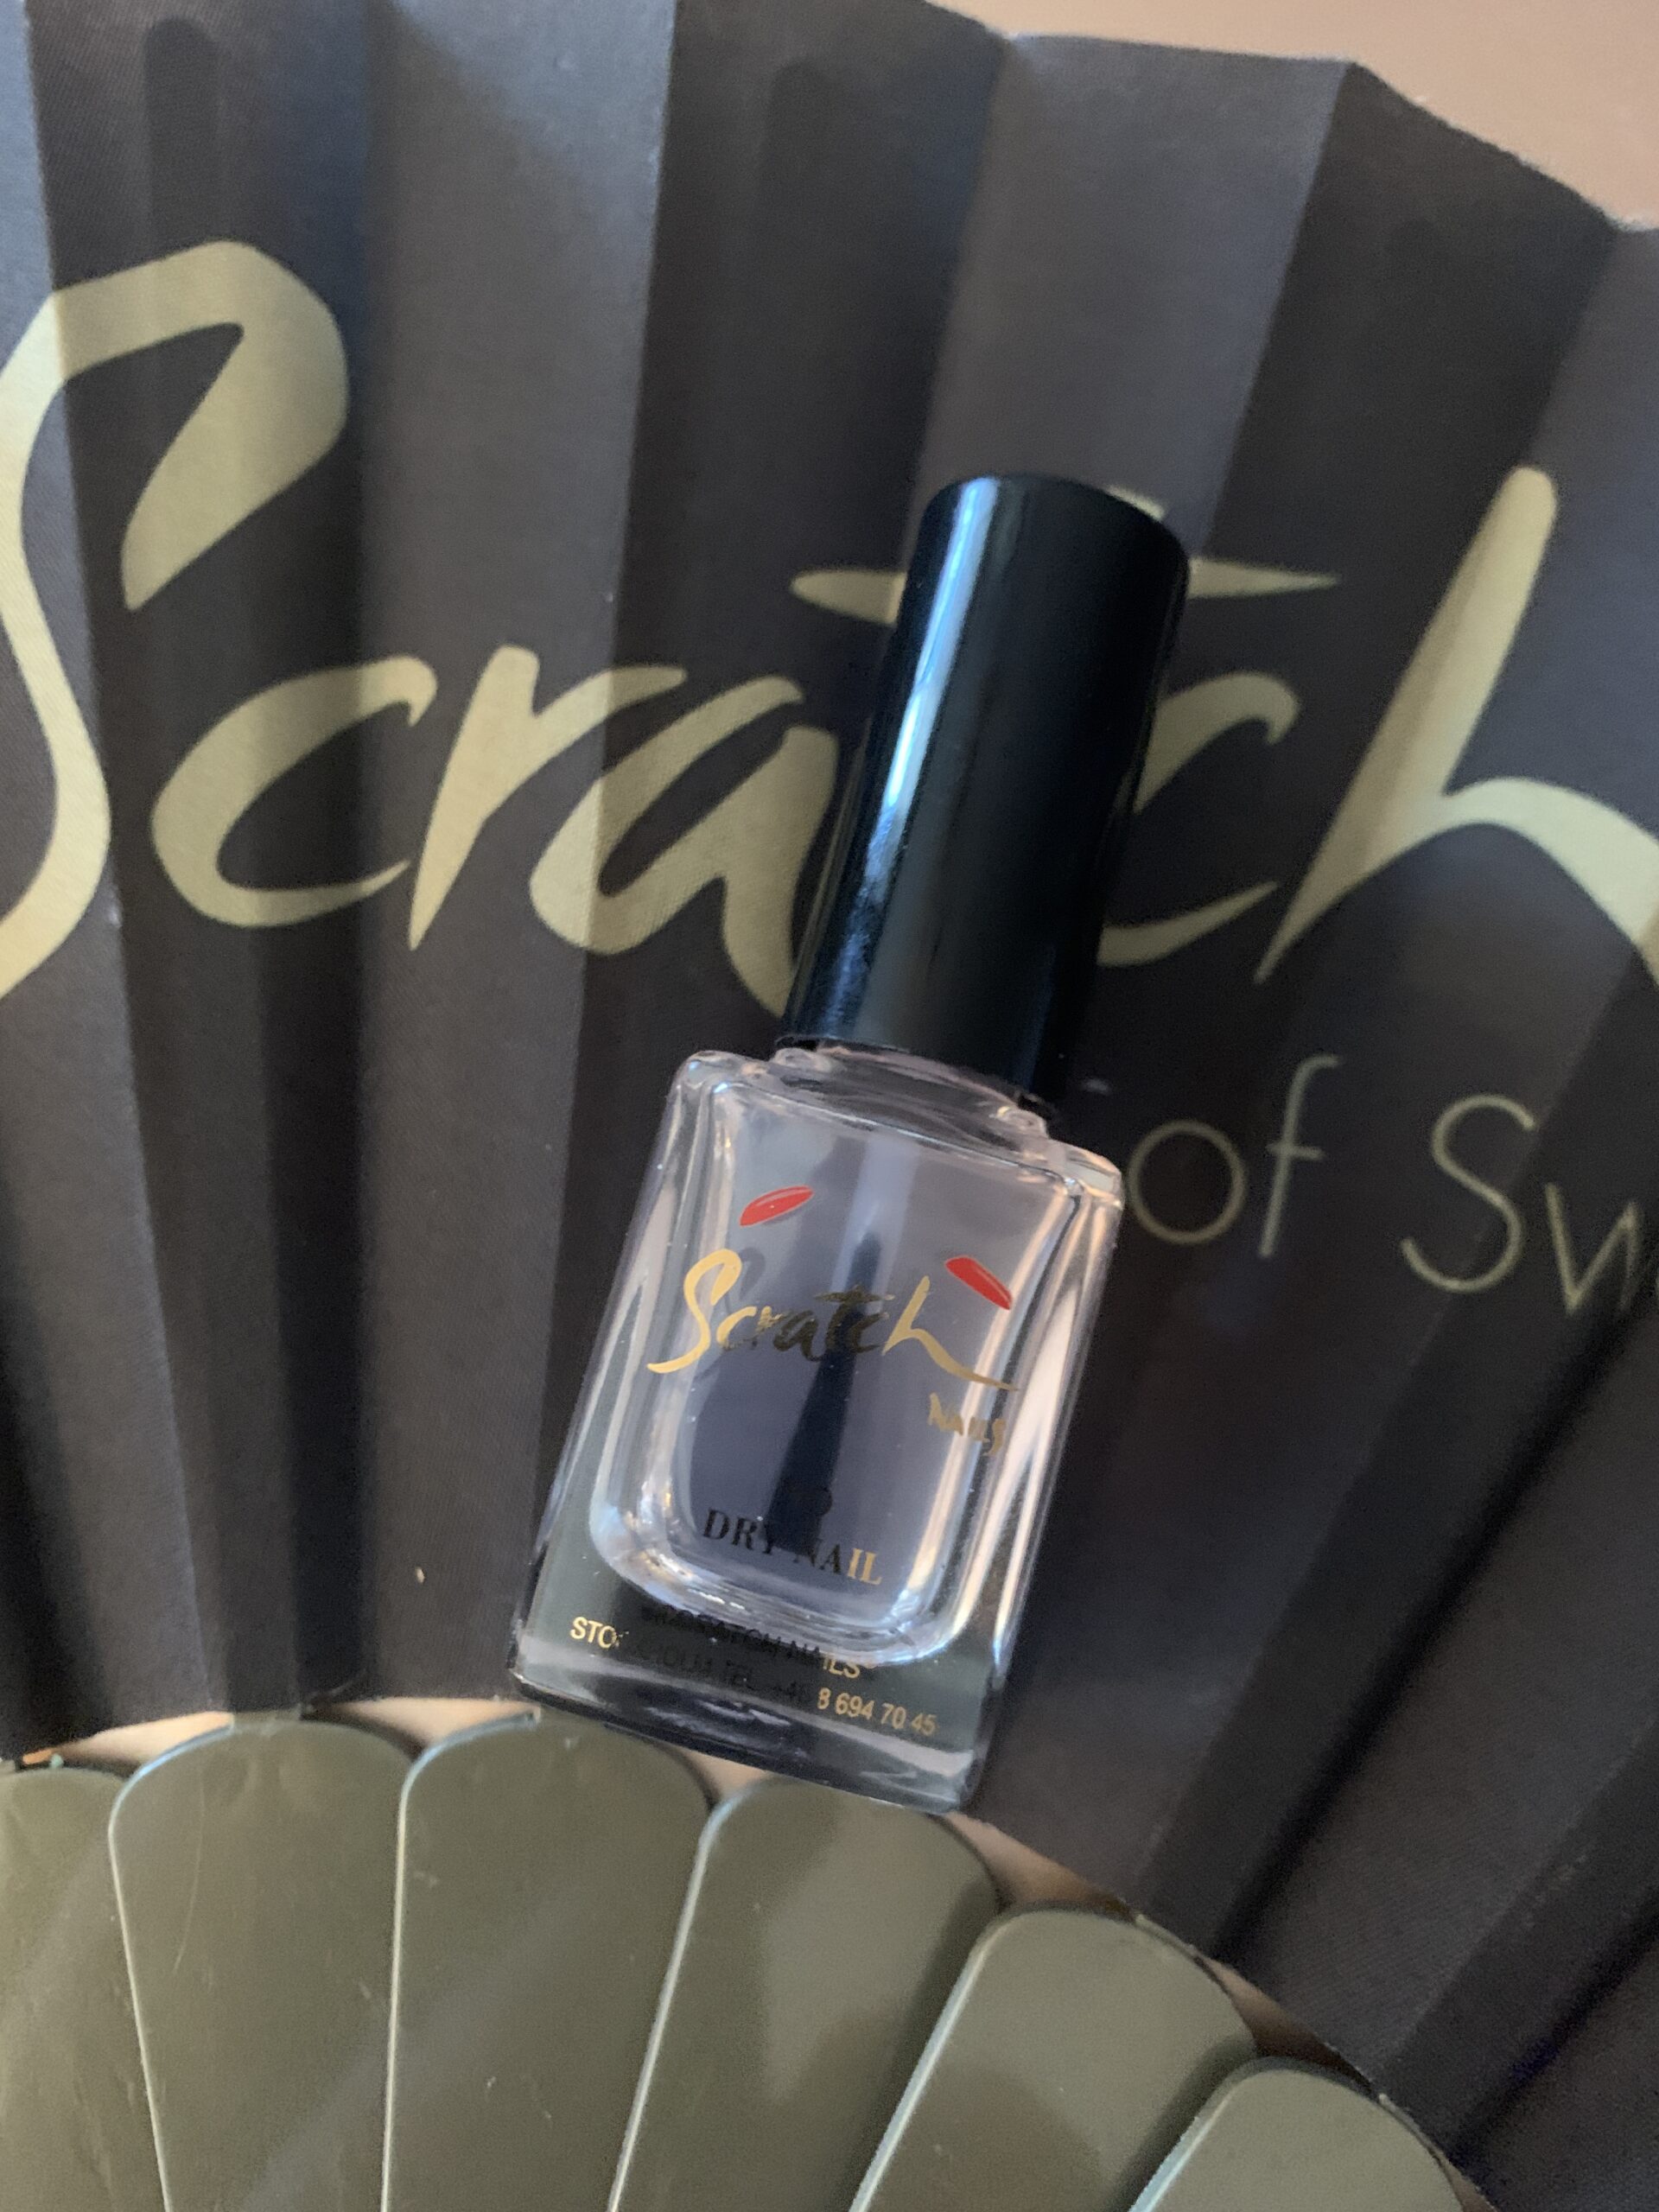 Scratch no dry nails